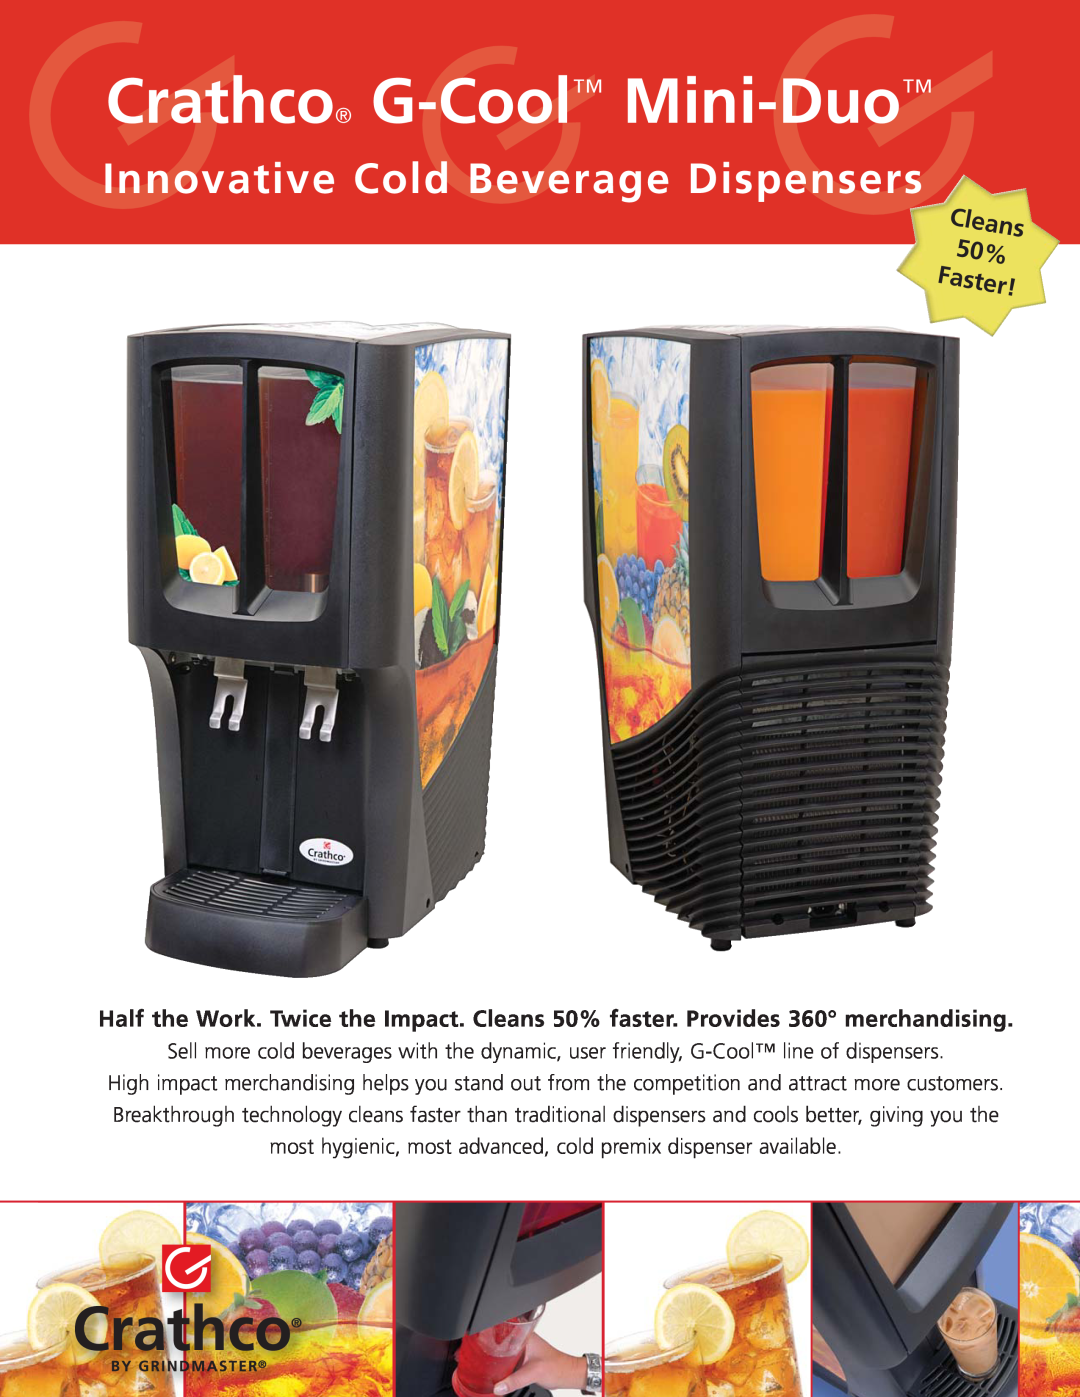 Grindmaster C-2S manual Crathco G-Cool Mini-Duo, Innovative Cold Beverage Dispensers, Cleans 50% Faster 